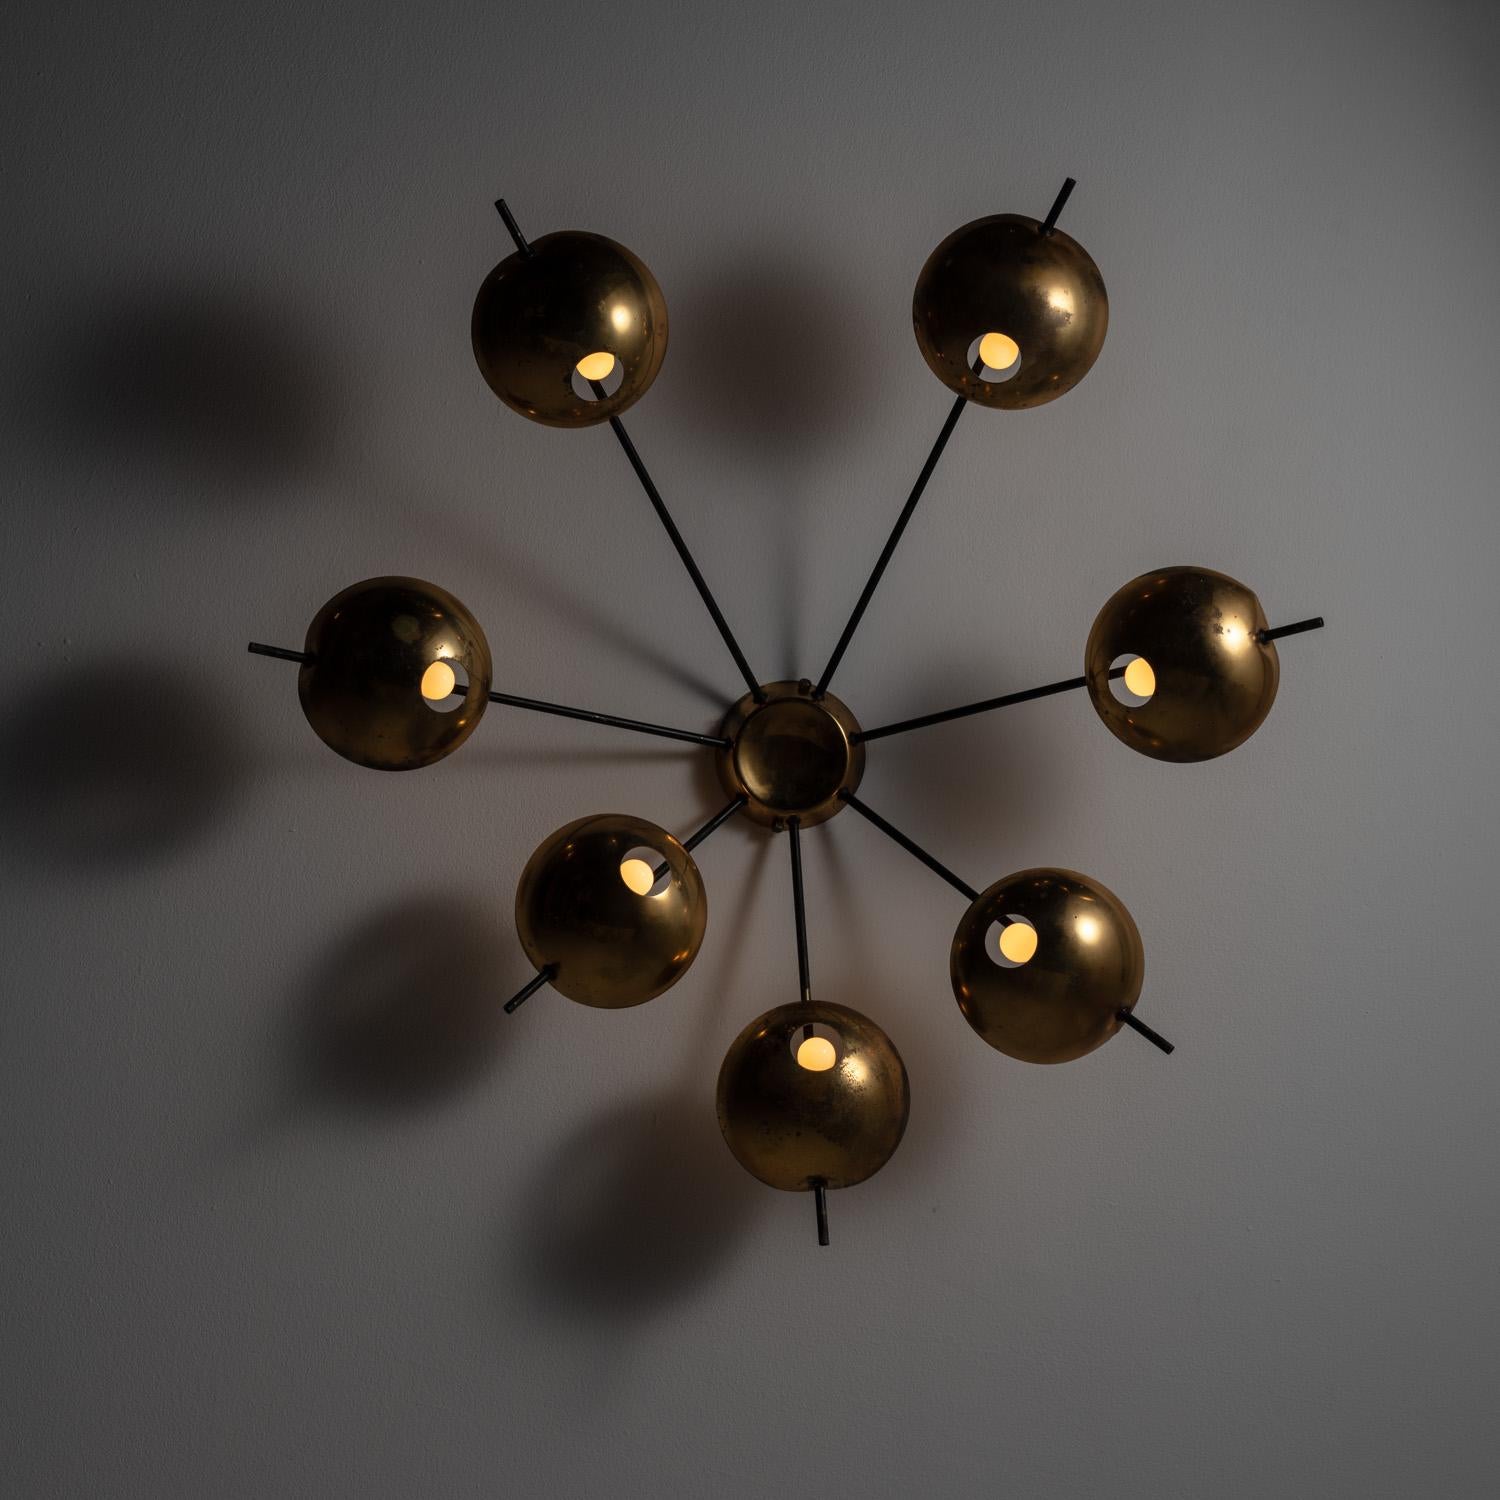 Rare Model 1036 ceiling light by Stilnovo by Stilnovo. Designed in Italy, circa 1960's. This light features beautifully aged copper. Wired for the US. We recommend five E14 base 60w maximum bulb.